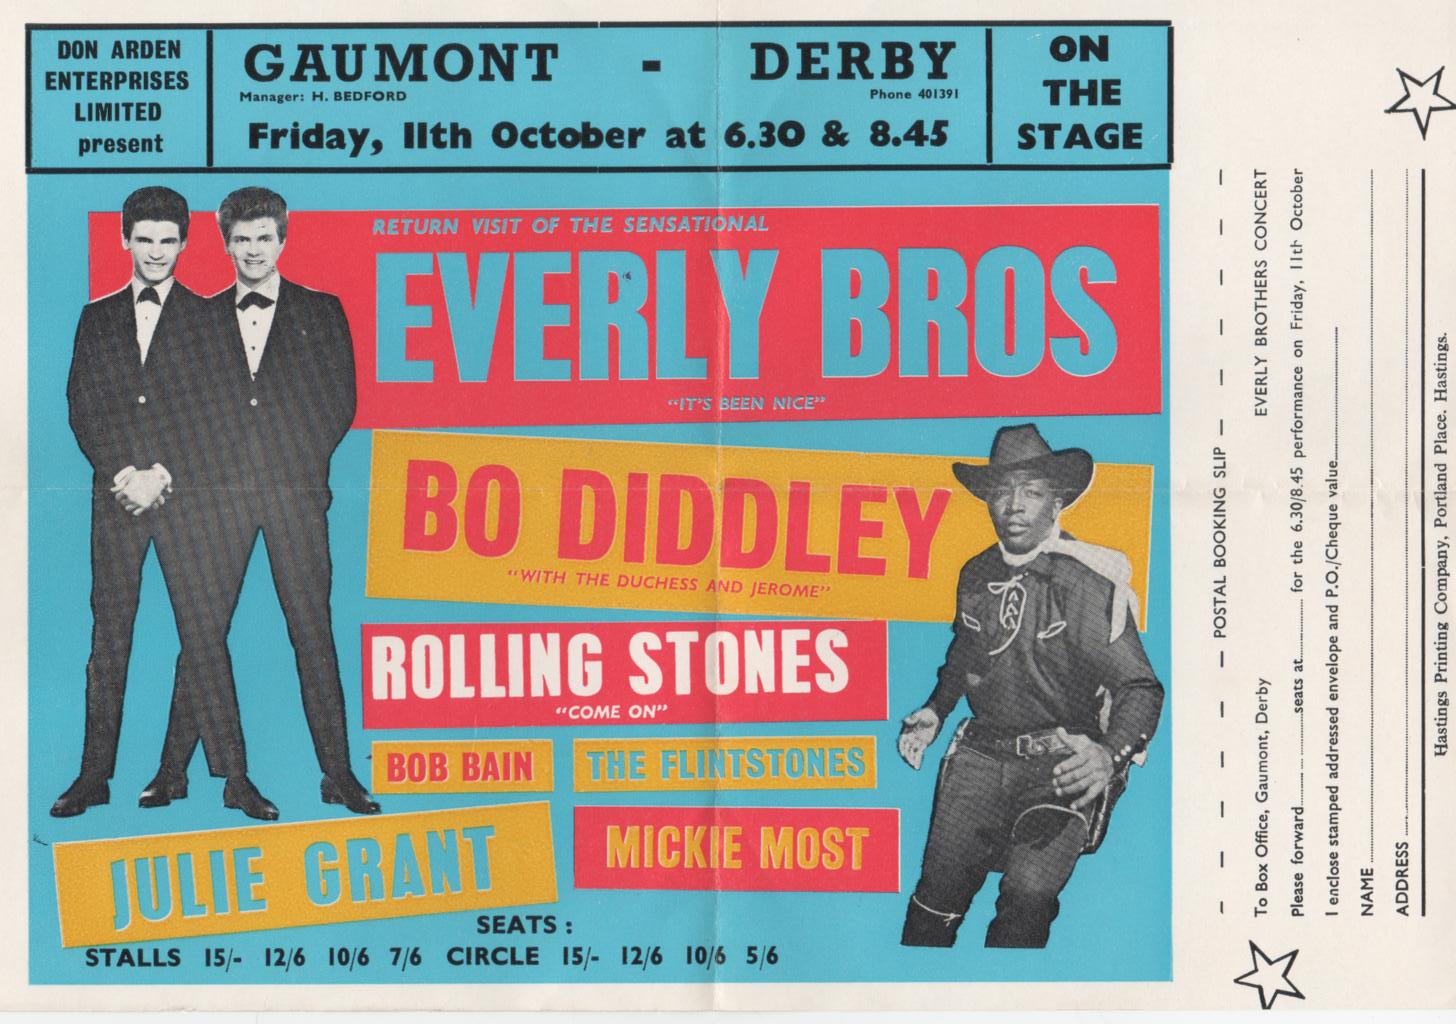 An Alternative Derby Wed 8th June Stones Diddley And Gig Loss Stats